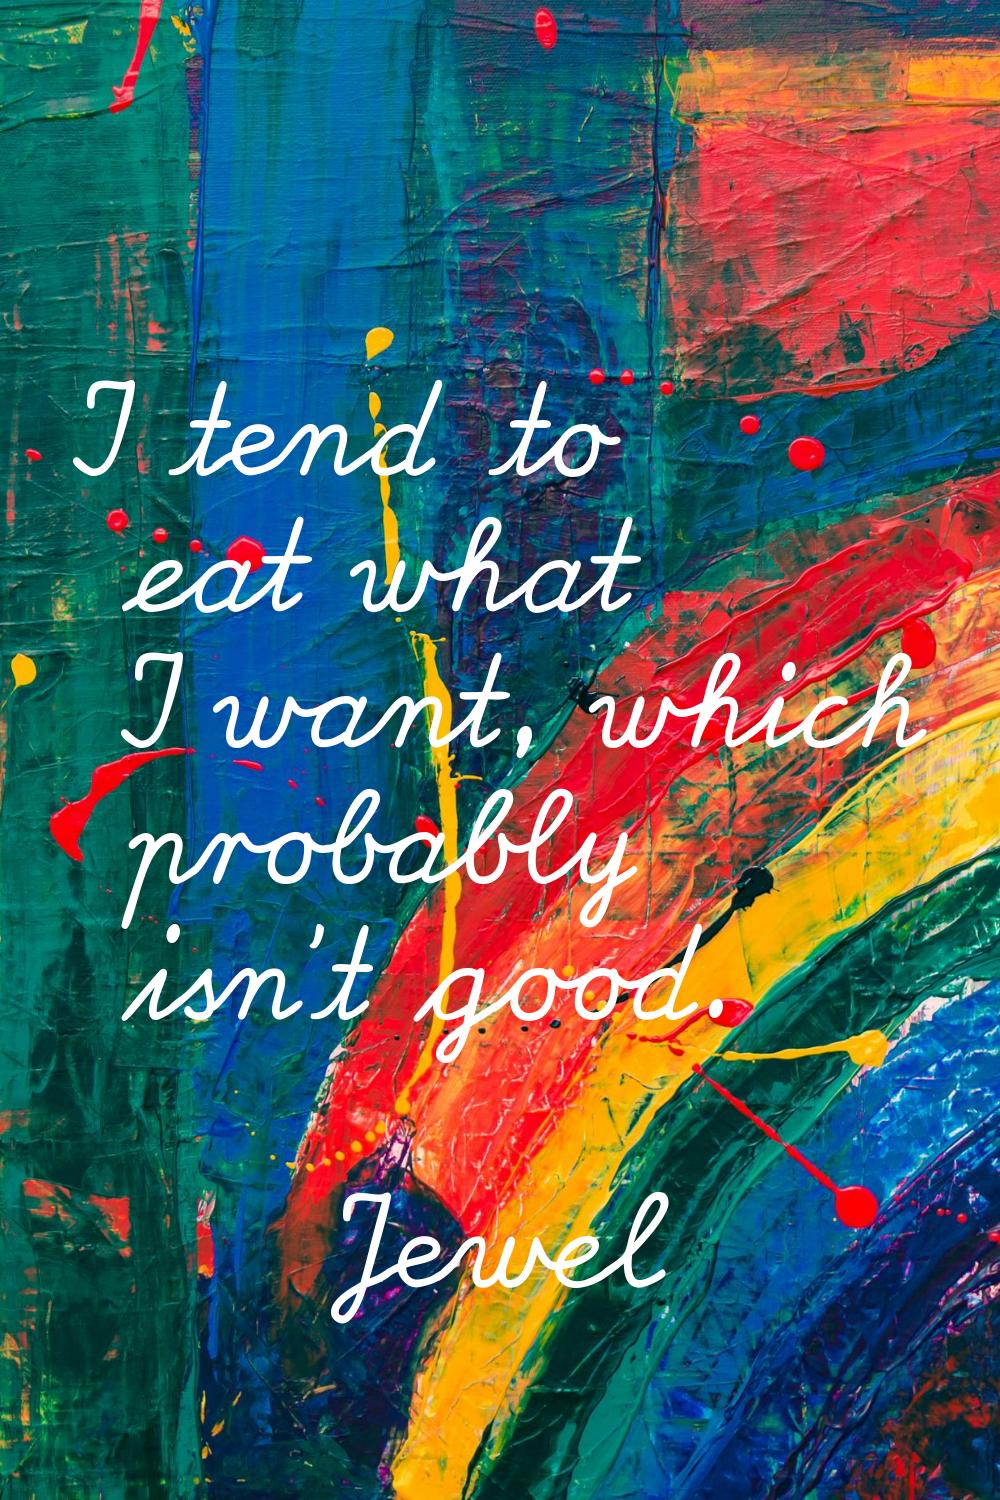 I tend to eat what I want, which probably isn't good.